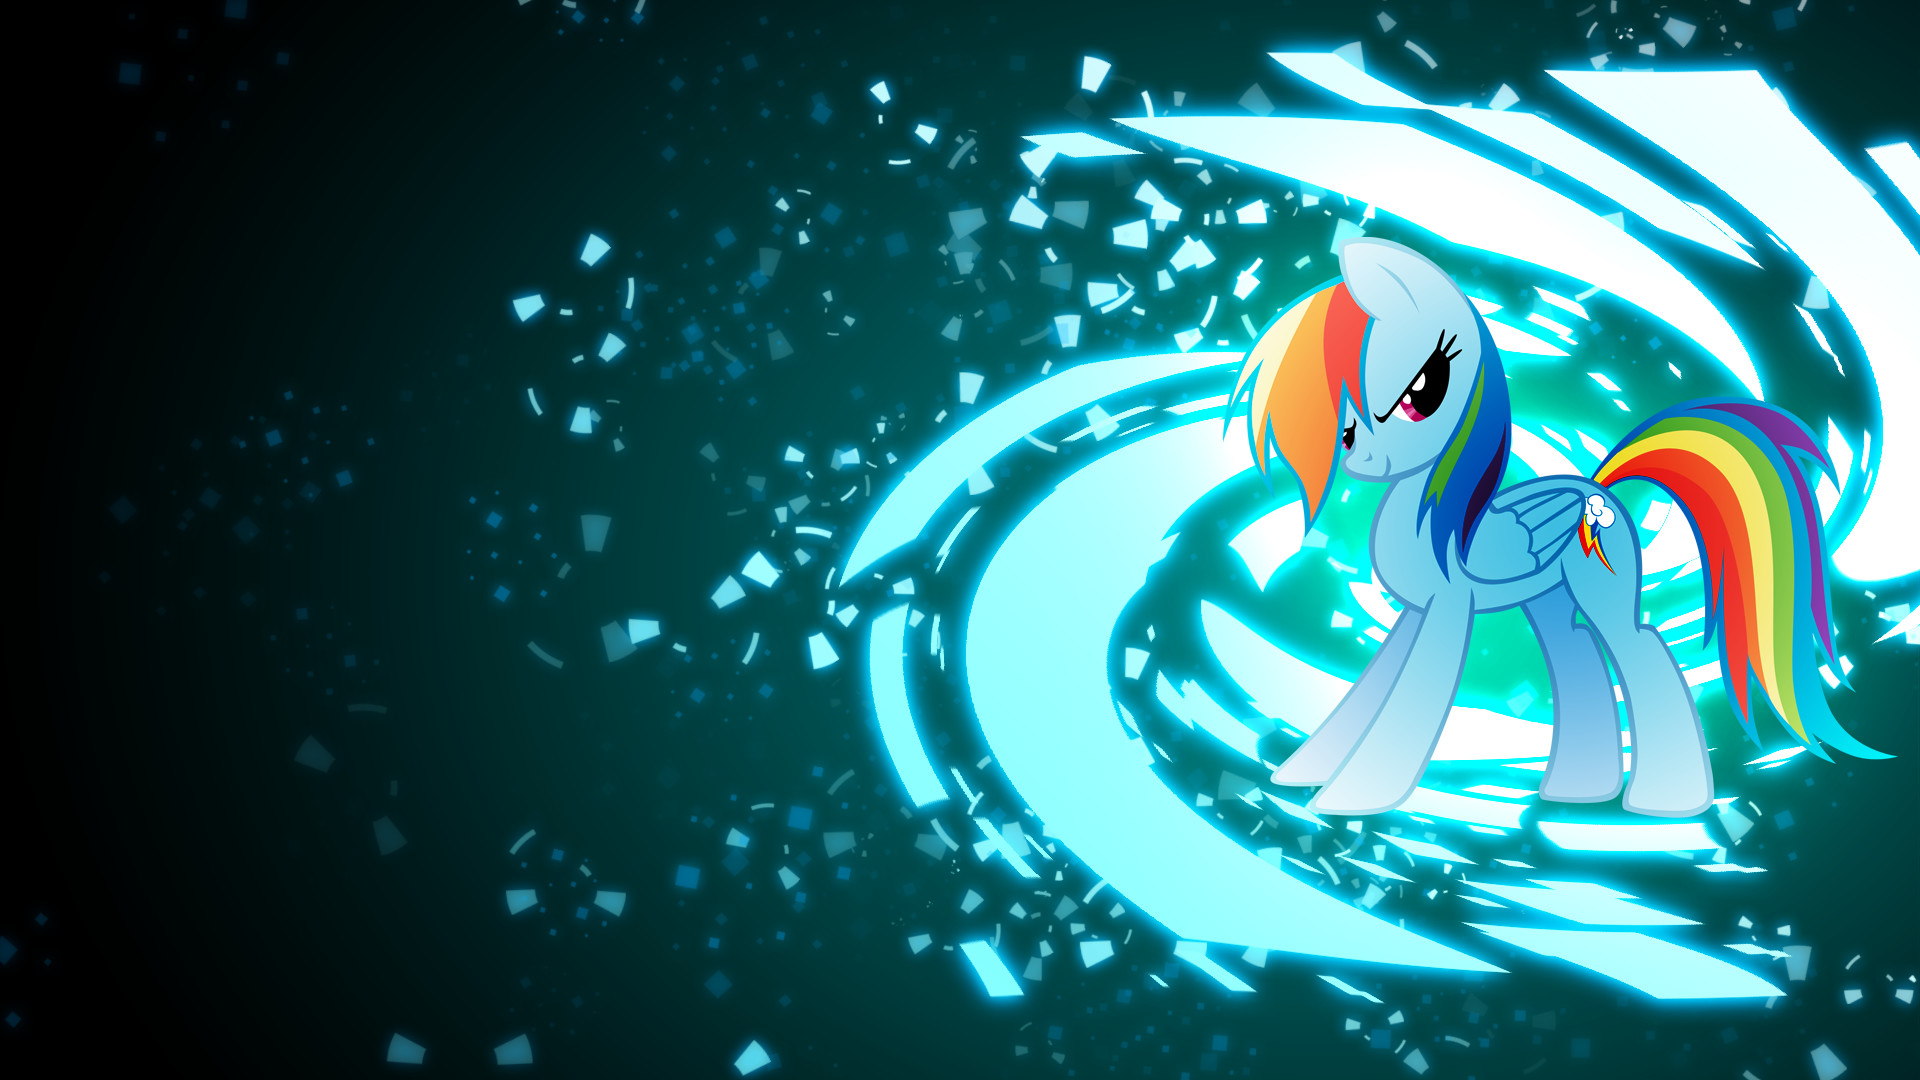 1920x1080 Full HD Pictures My Little Pony Rainbow Dash 1005.09 Kb